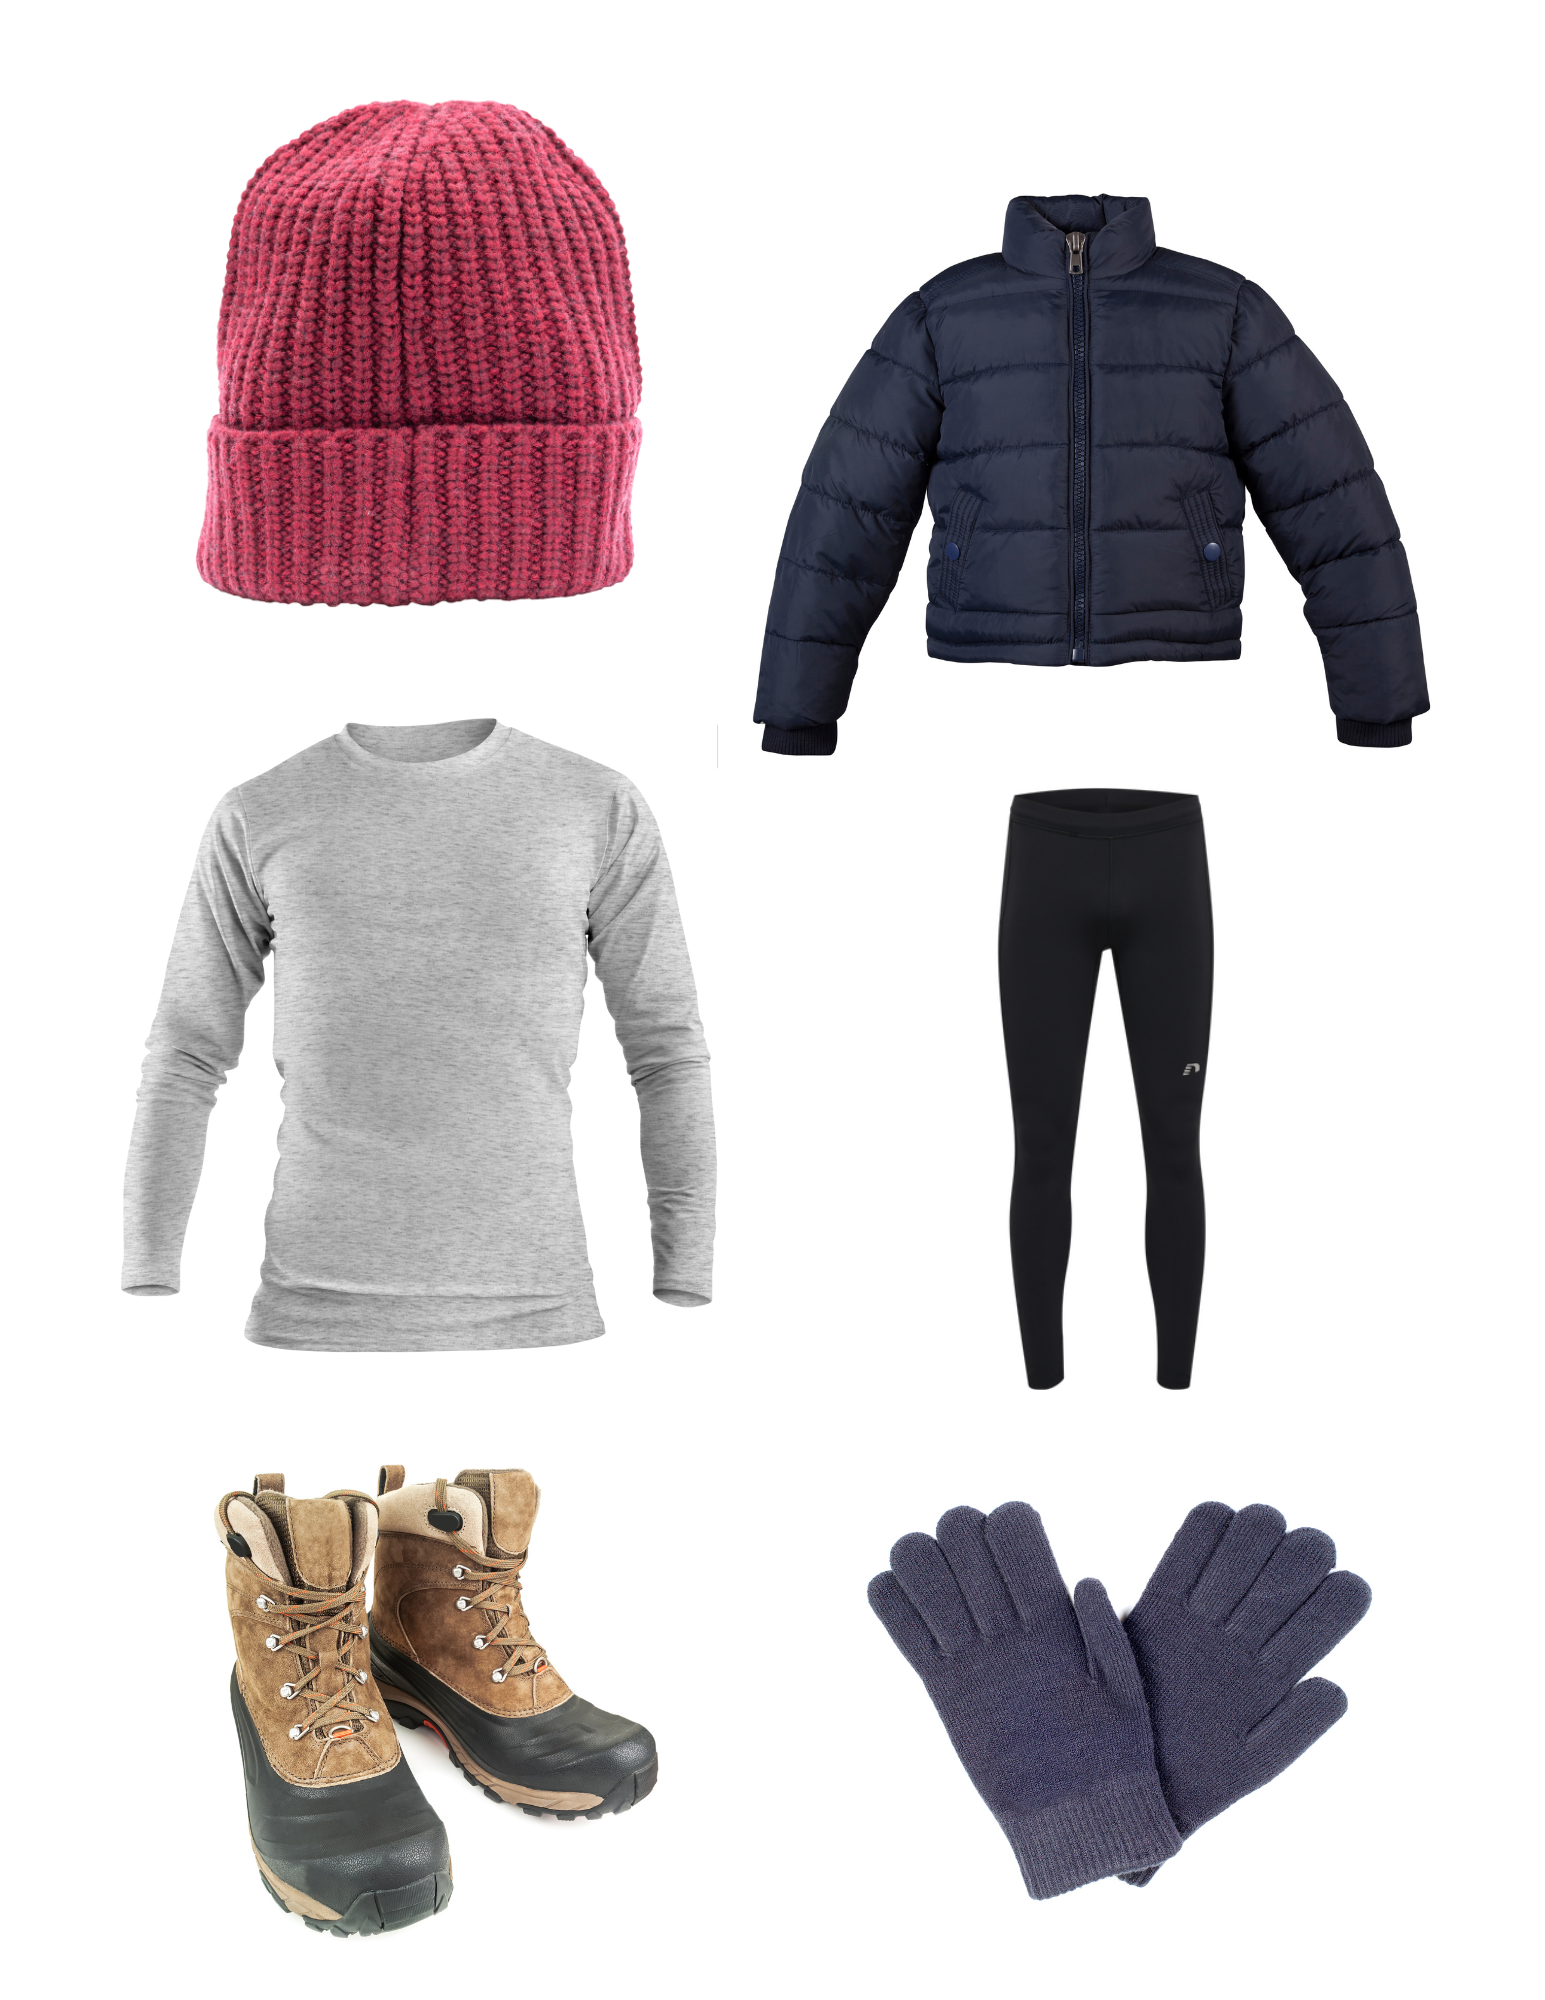 Cold weather clothing like gloves, hats, and layering